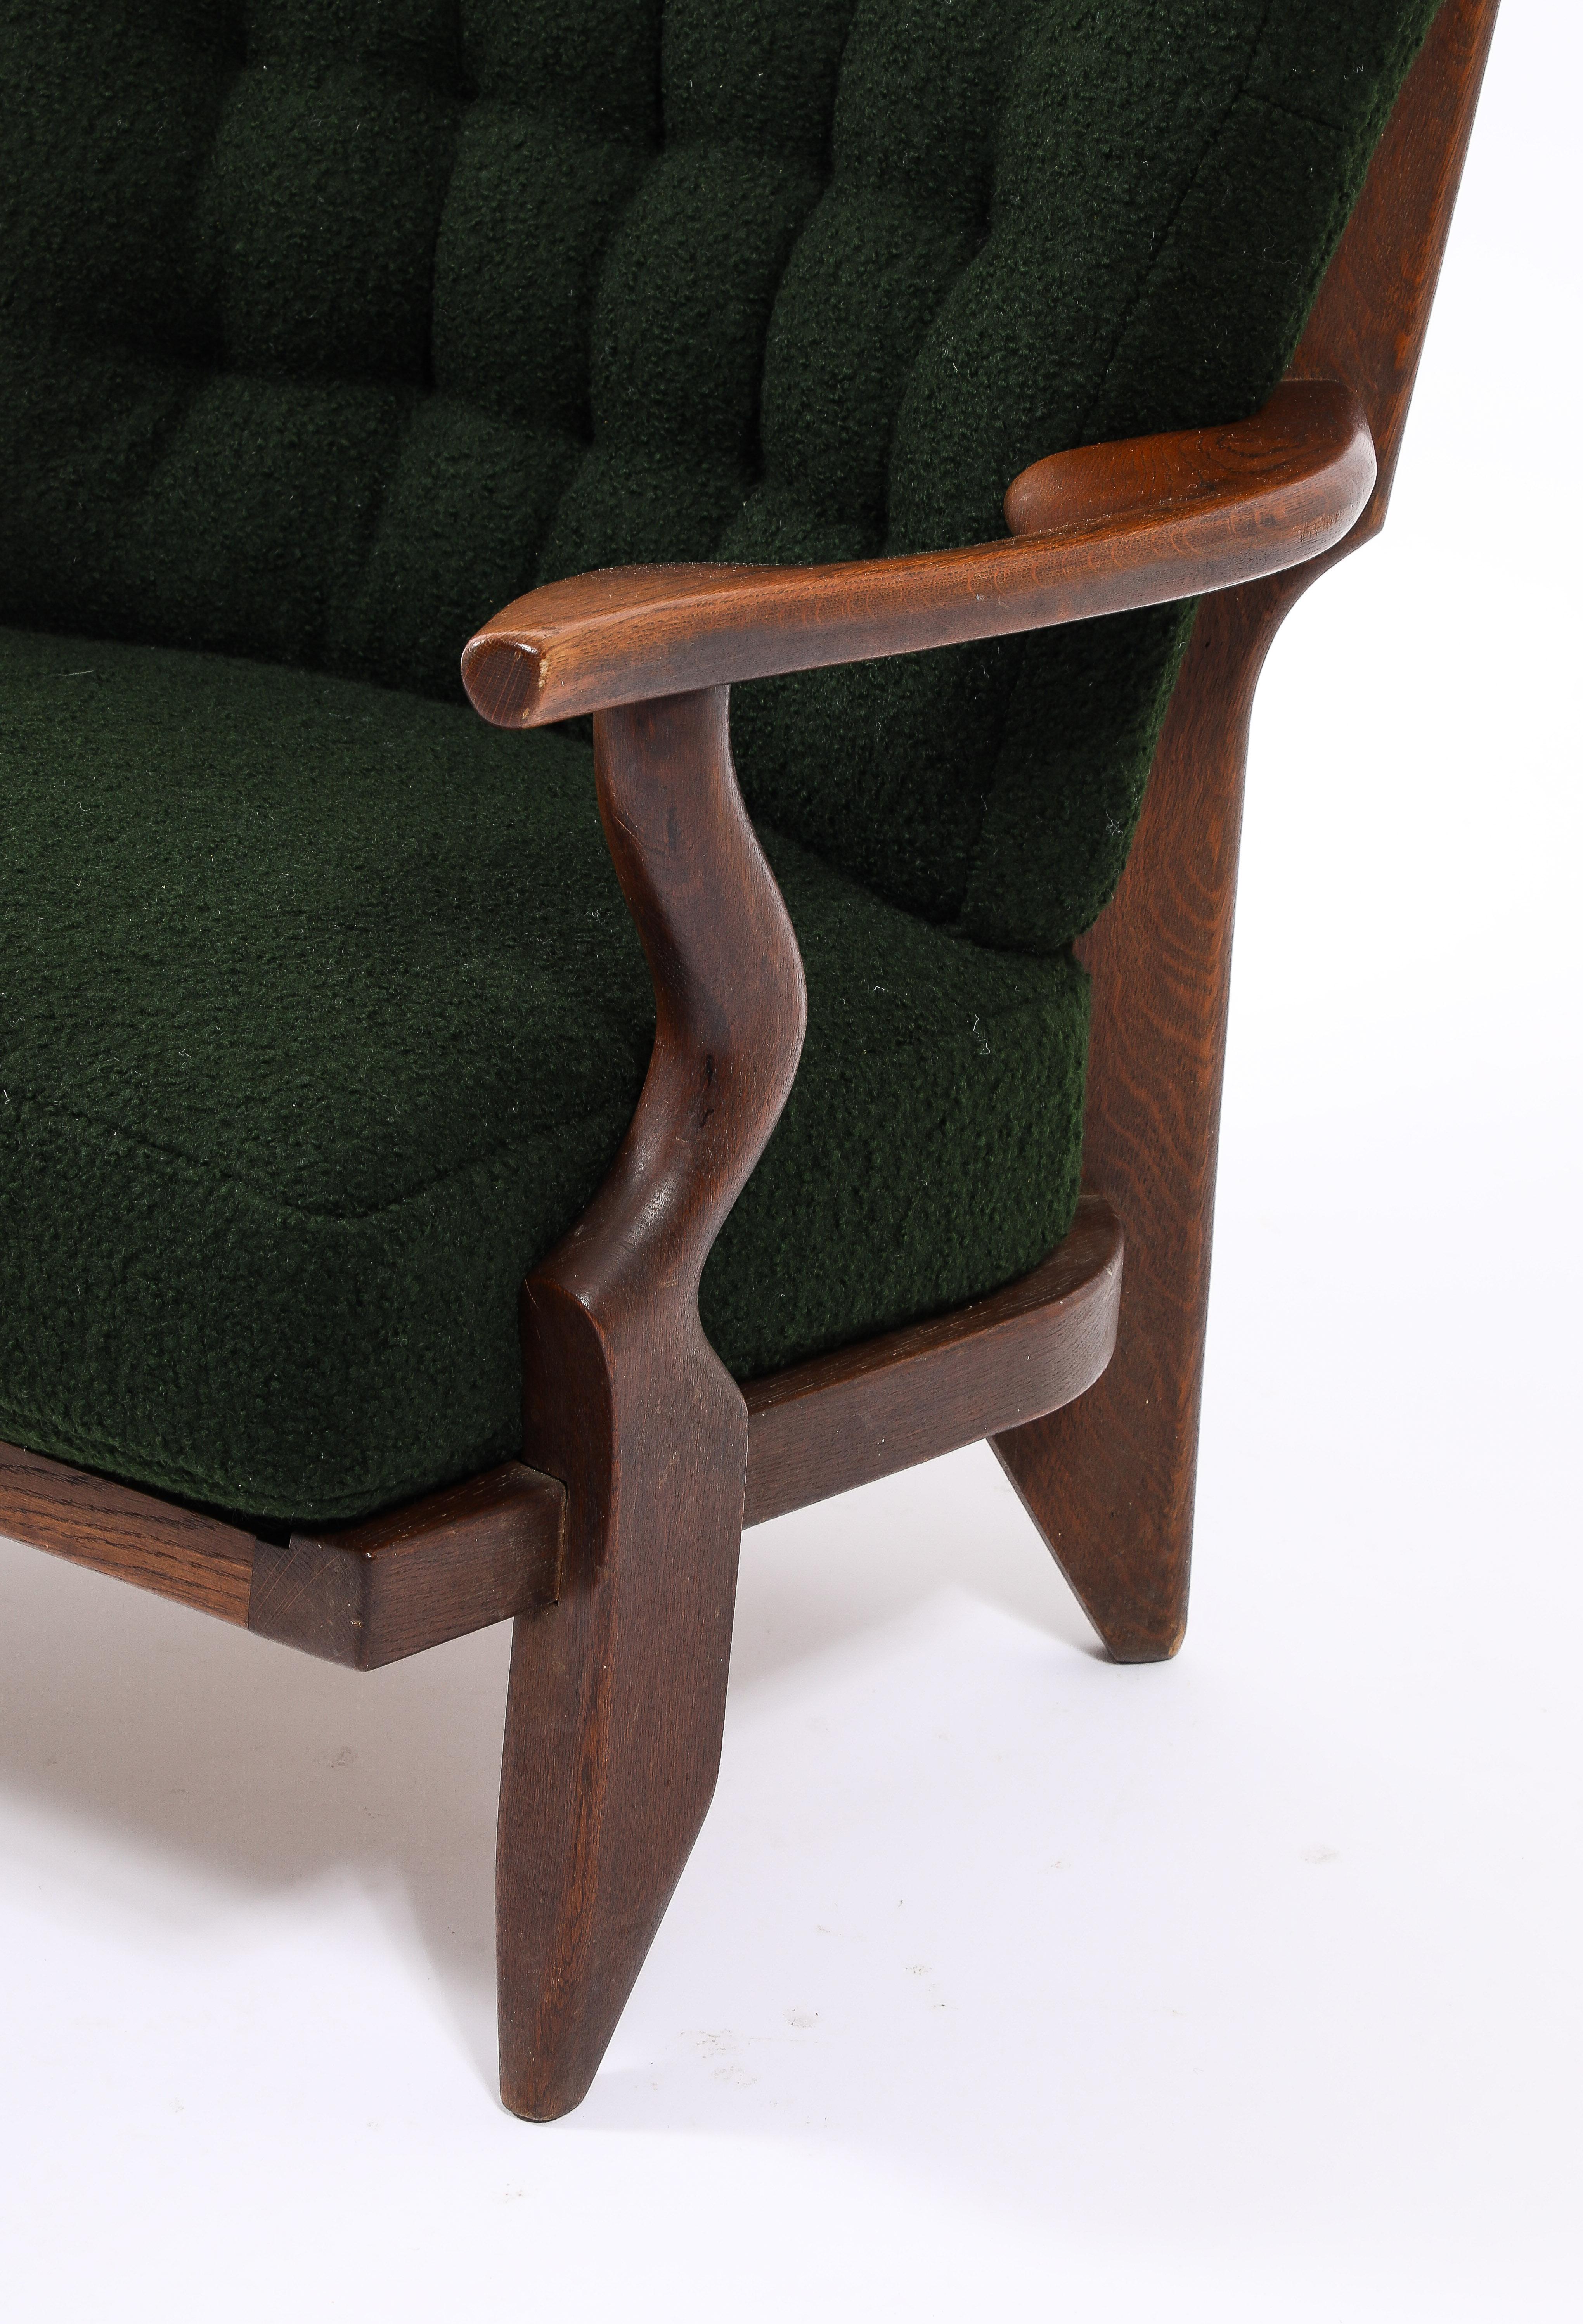 Guillerme & Chambron Petit Repos Armchair in Green Bouclé, France 1950's For Sale 5